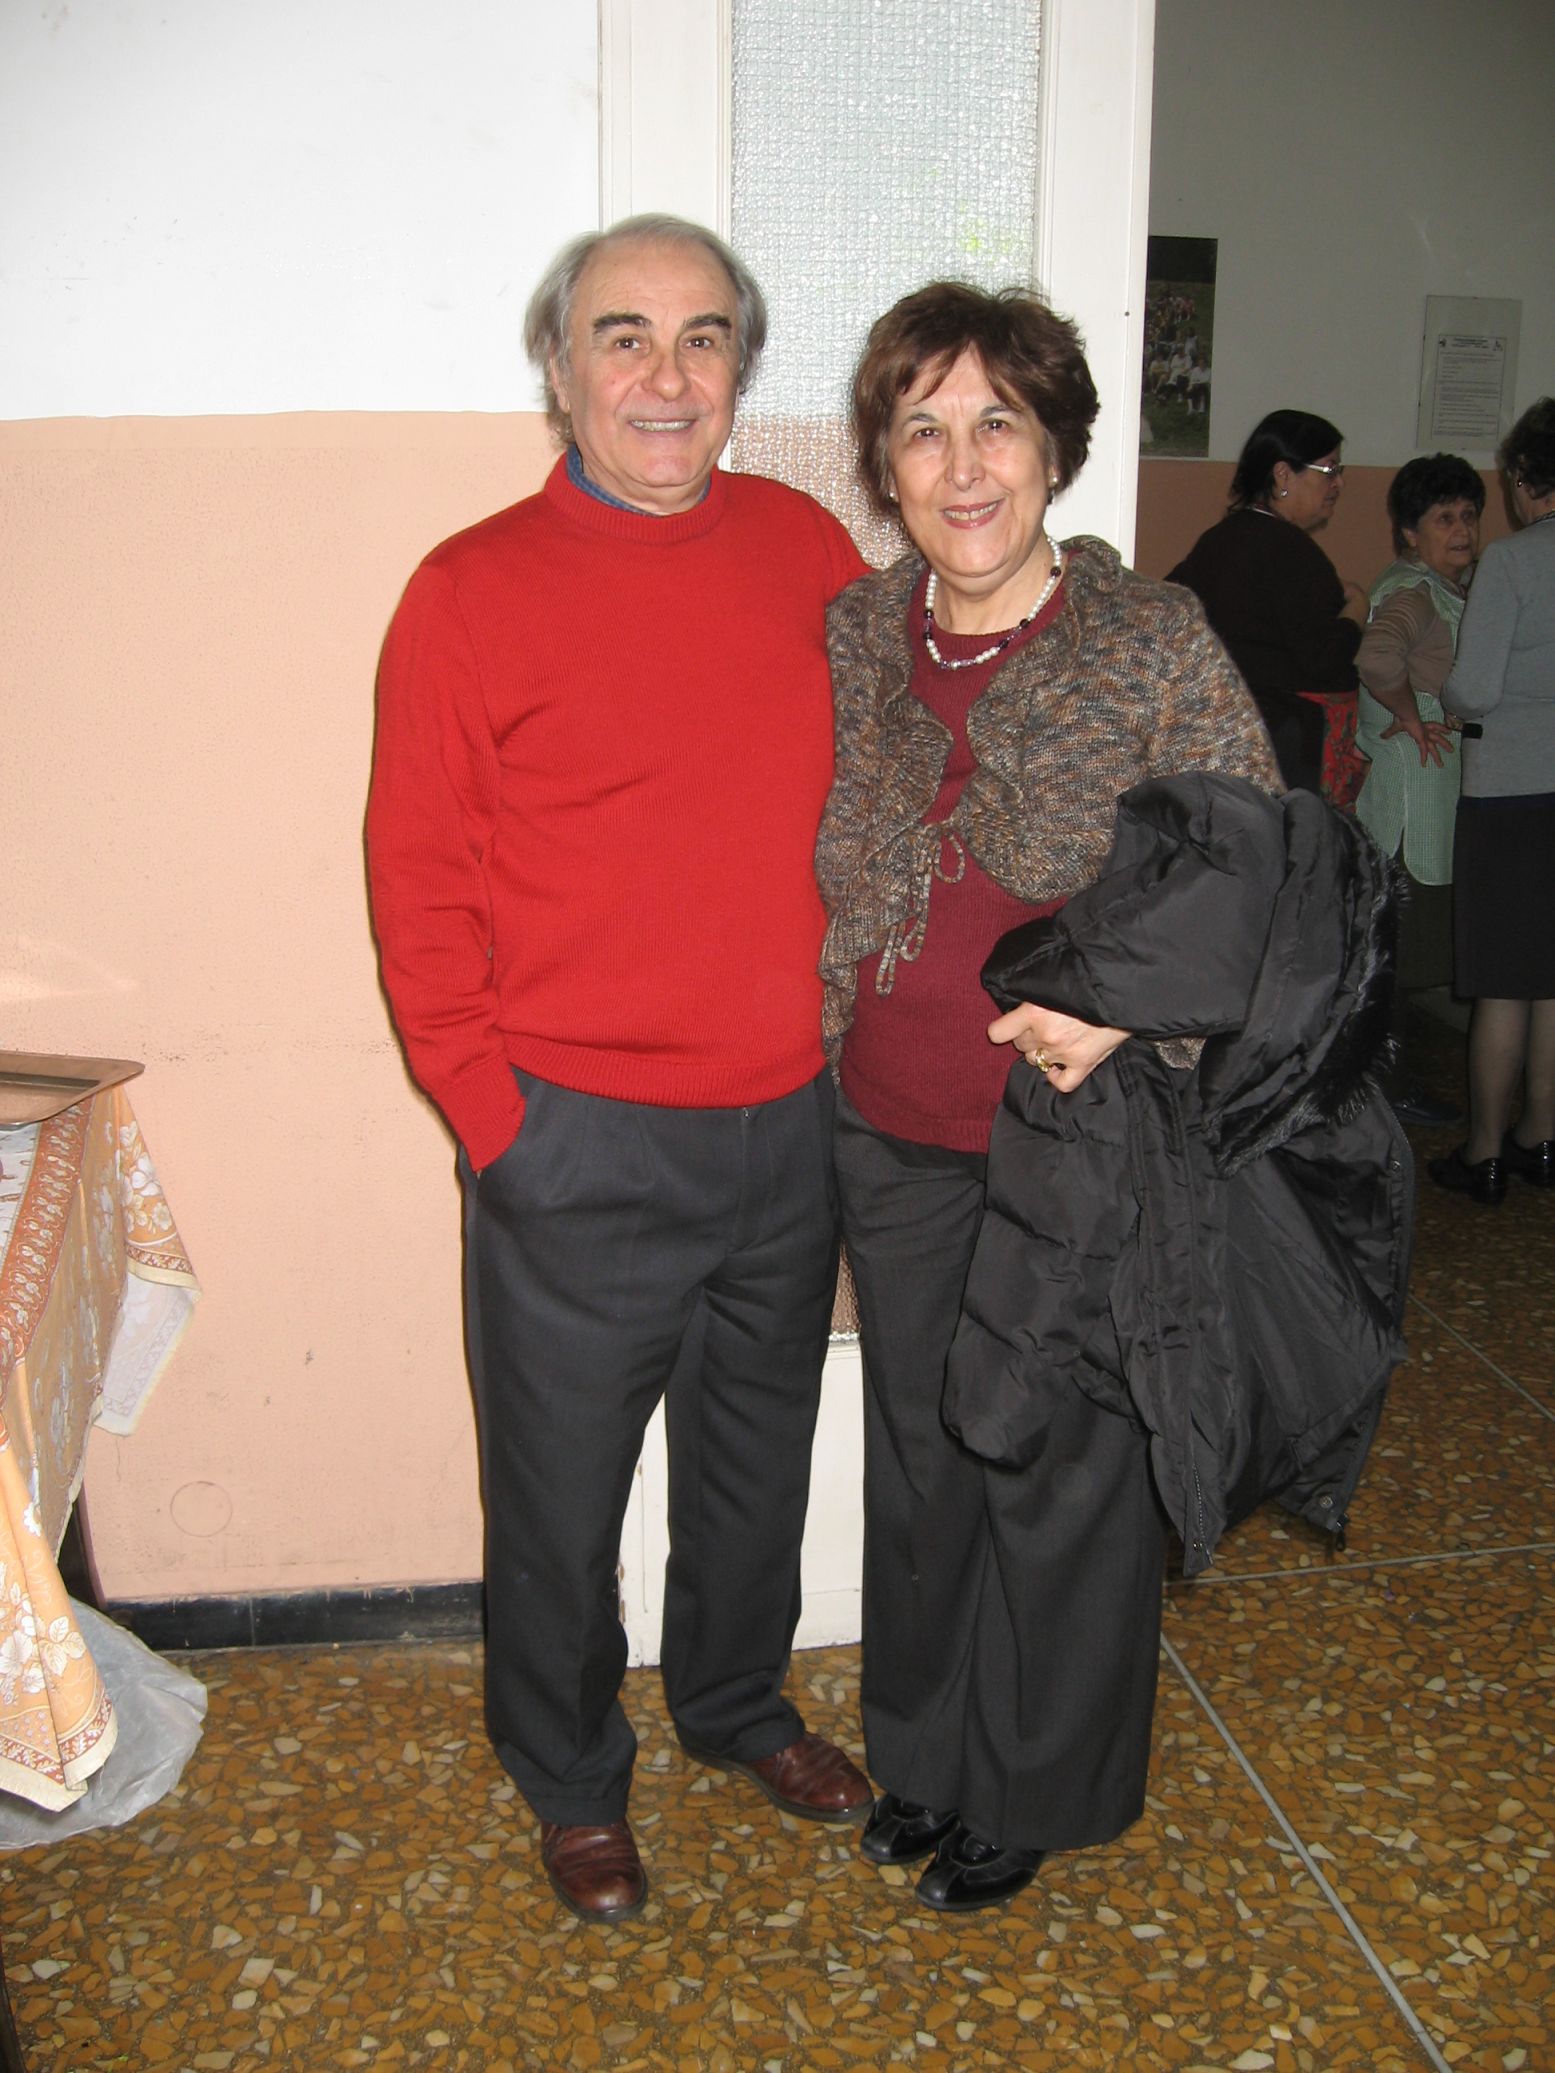 Compleanno-2010-02-07--14.29.18